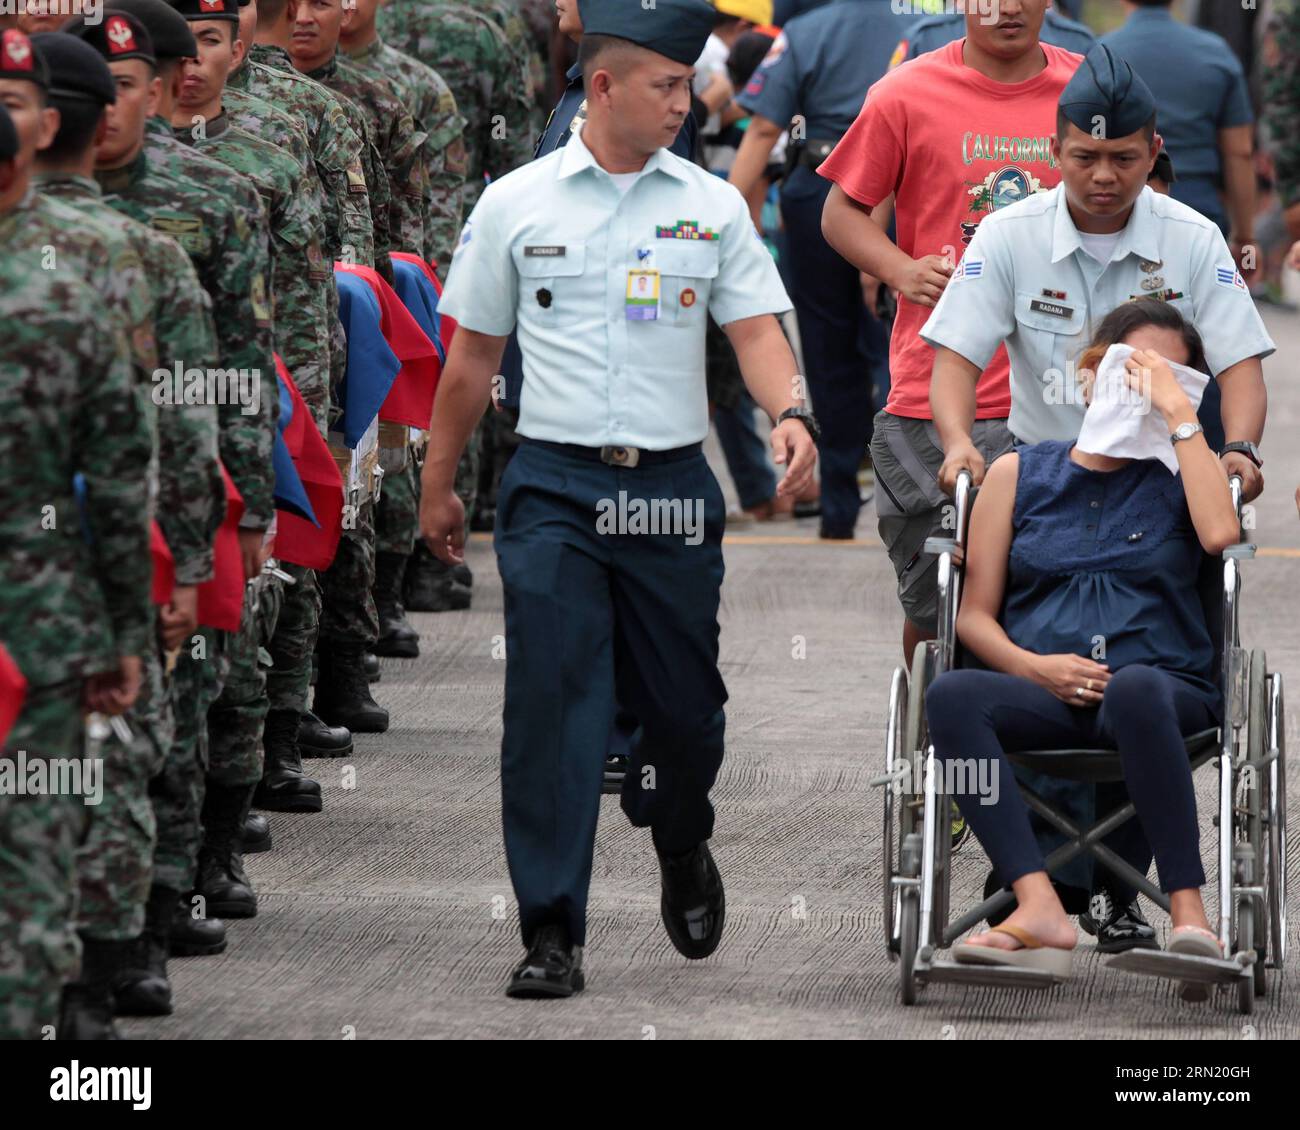 (150129) -- PASAY CITY, Jan. 29, 2015 -- A pregnant relative of one of the fallen Philippine National Police Special Action Force (PNP-SAF) members sits in a wheelchair after fainting at the Villamor Air Base in Pasay City, the Philippines, Jan. 29, 2015. Forty-four members of the PNP-SAF were killed allegedly by Moro Islamic Liberation Front and Bangsamoro Islamic Freedom Fighters members on Jan. 25 in Mamasapano, Maguindanao. ) PHILIPPINES-PASAY CITY-POLICE RouellexUmali PUBLICATIONxNOTxINxCHN   Pasay City Jan 29 2015 a Pregnant relative of One of The Fall Philippine National Police Special Stock Photo